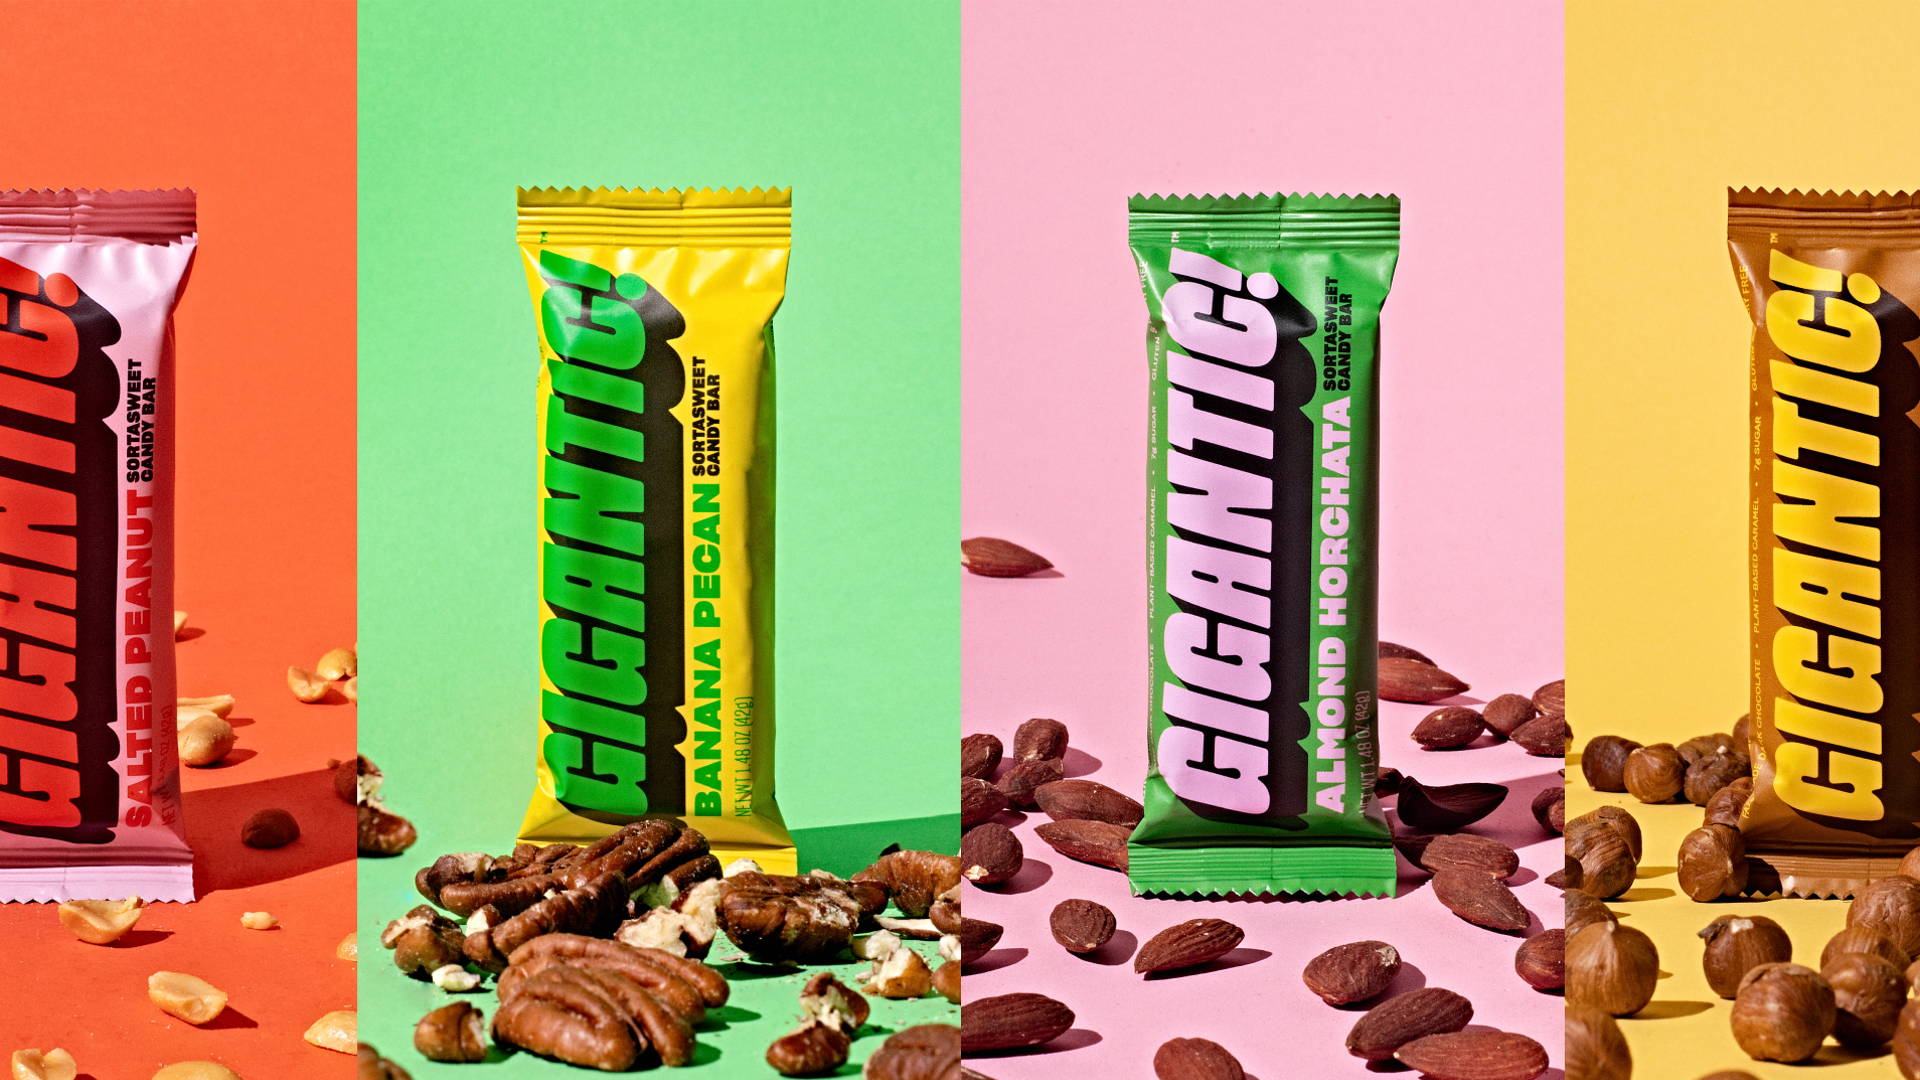 Featured image for 'Gigantic!' Brand Identity Is Bold And Bombastic